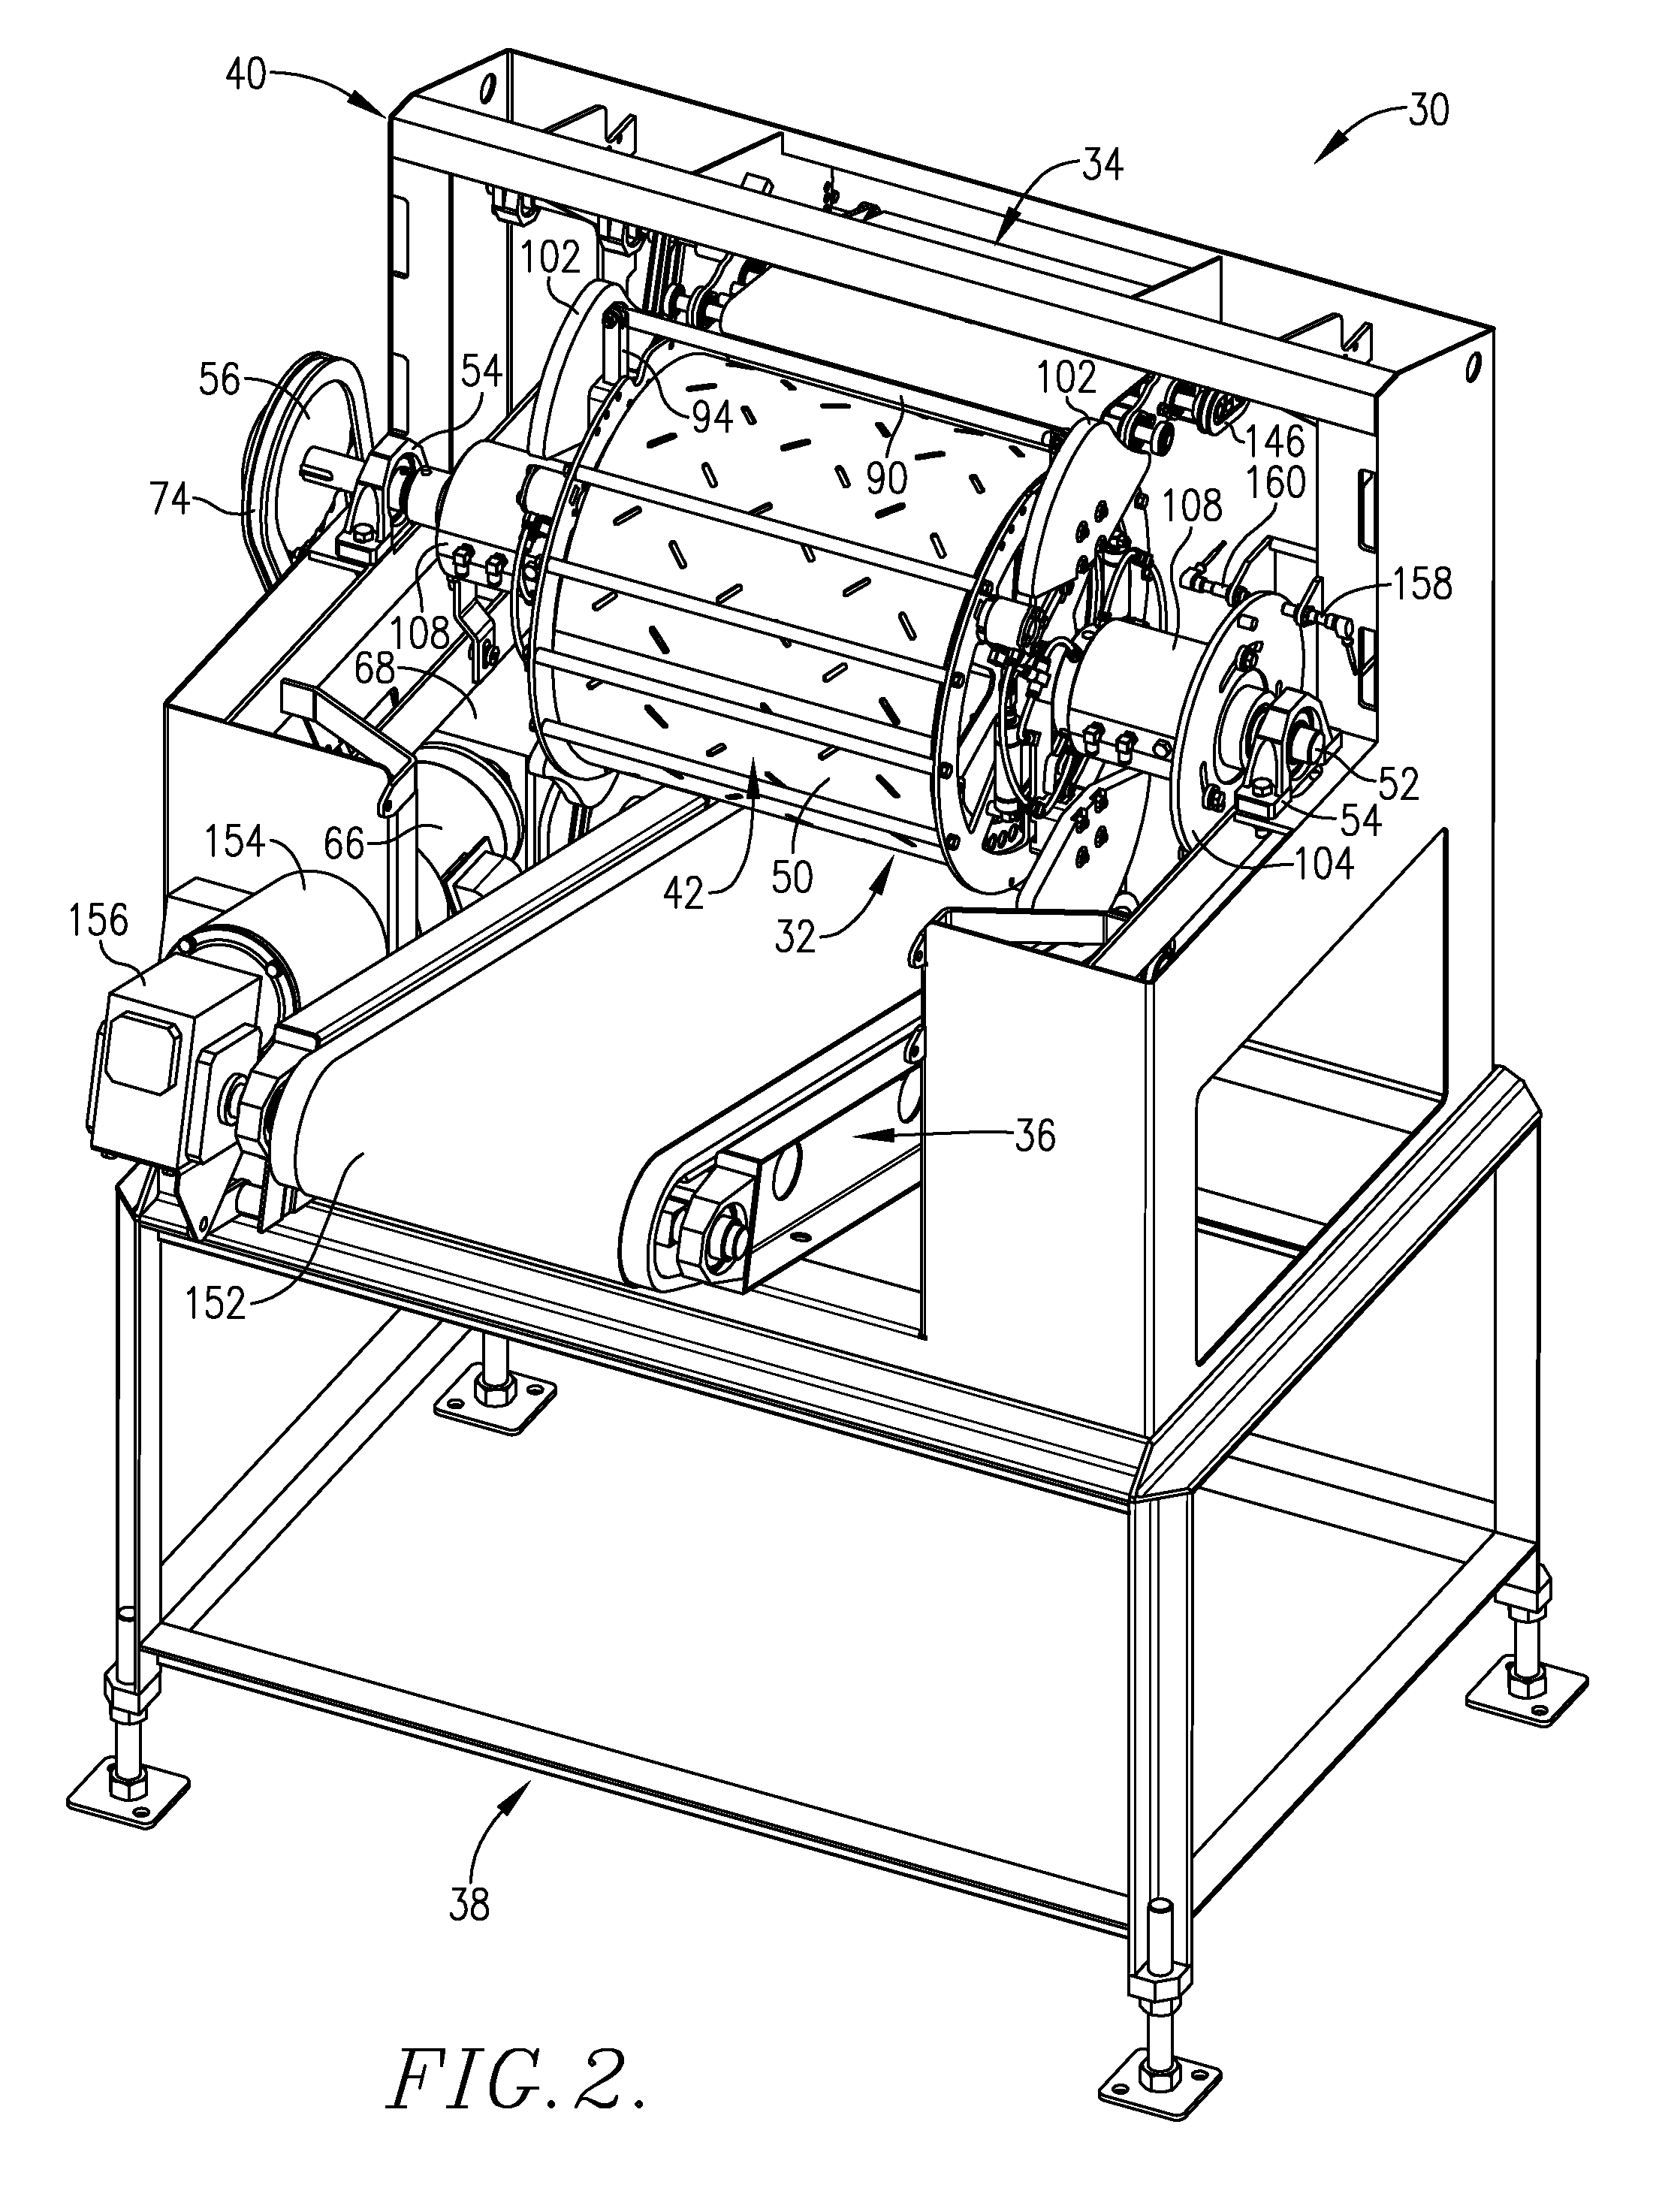 Apparatus and method for processing of pork bellies